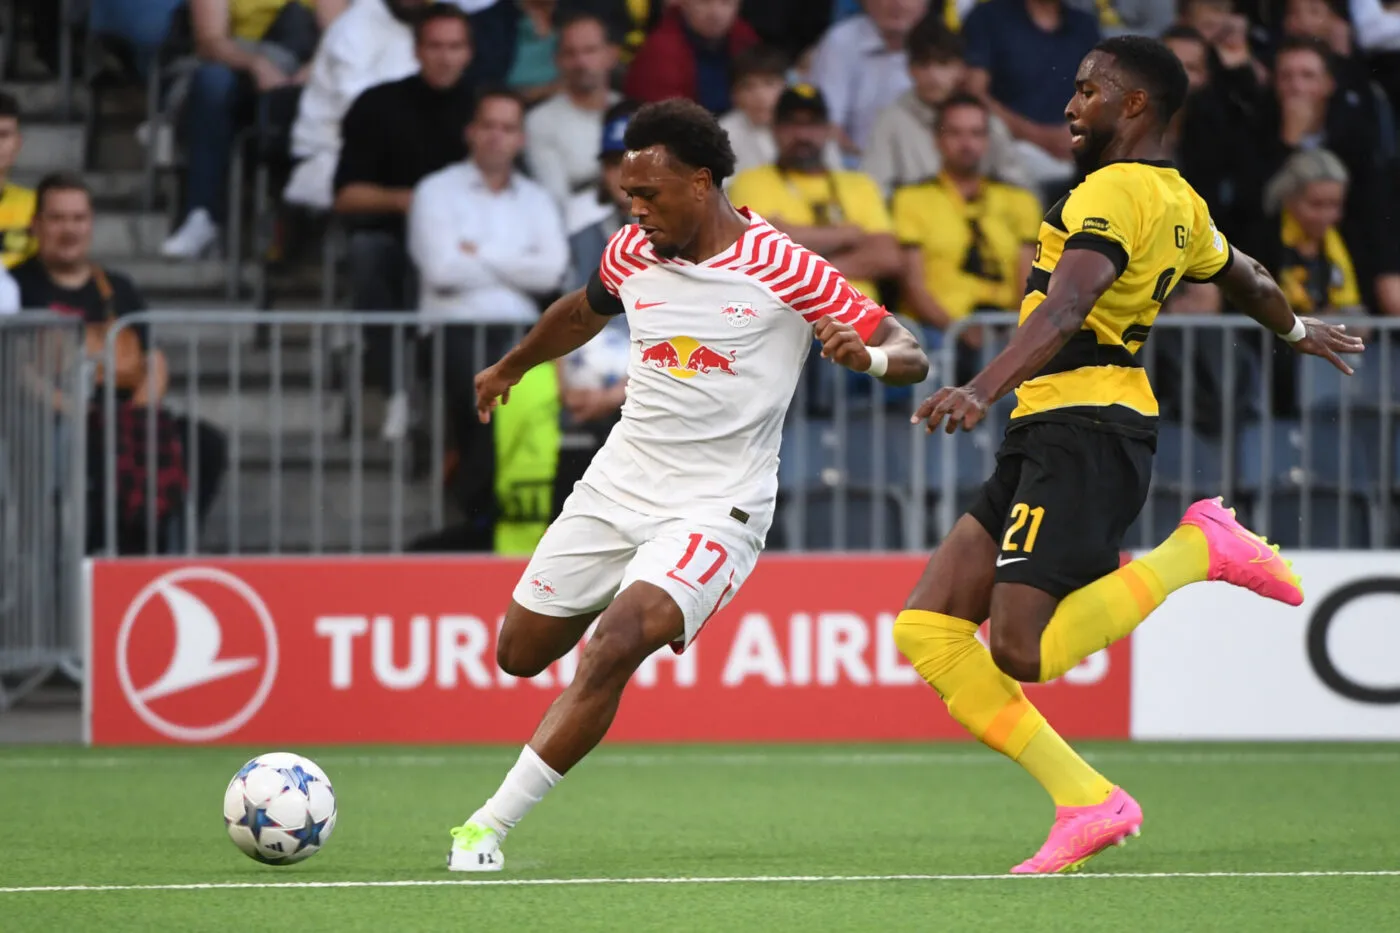 September 19, 2023, Bern, Wankdorf, UEFA Champions League: Young Boys - Leipzig, #17 Lois Openda (Leipzig) against #21 Ulisses Garcia (Young Boys). - Photo by Icon sport